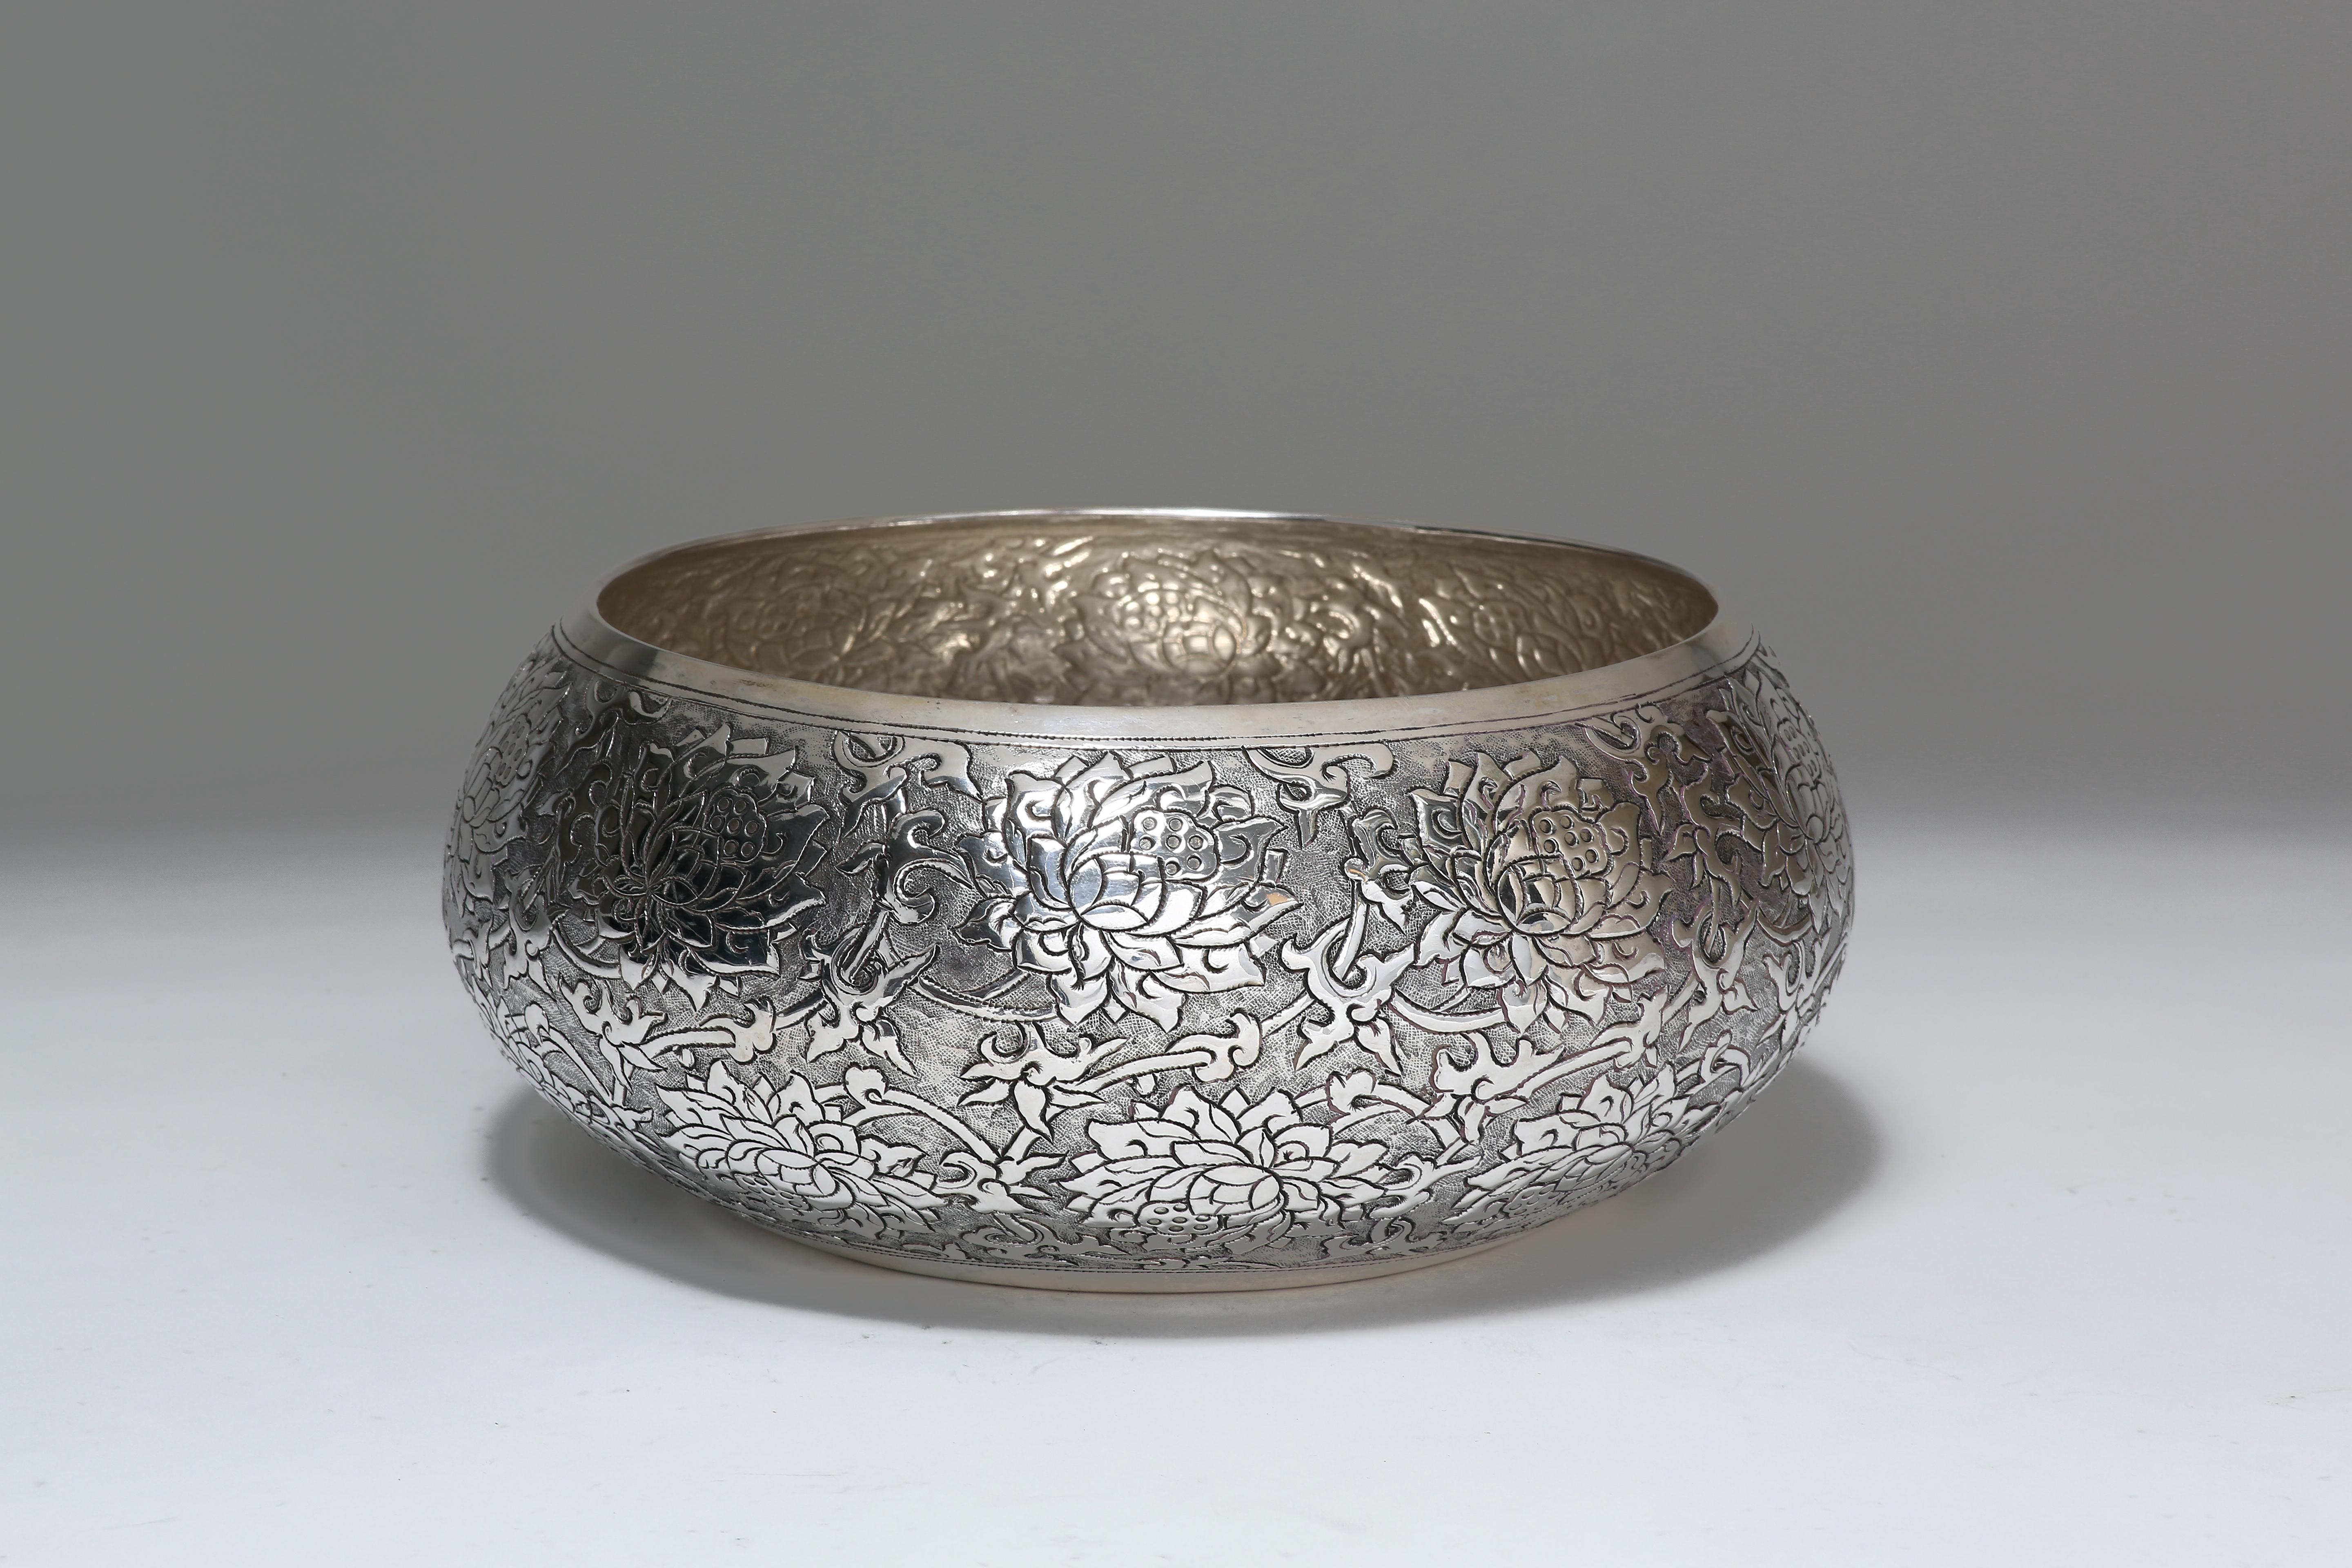 The fine hand-worked solid silver bowl is meticulously chased with classic scrolling lotus motif. It is available in other sizes.
Lotus is a symbol of purity, grace, elegancy and perseverance. The silver is 90% pure.